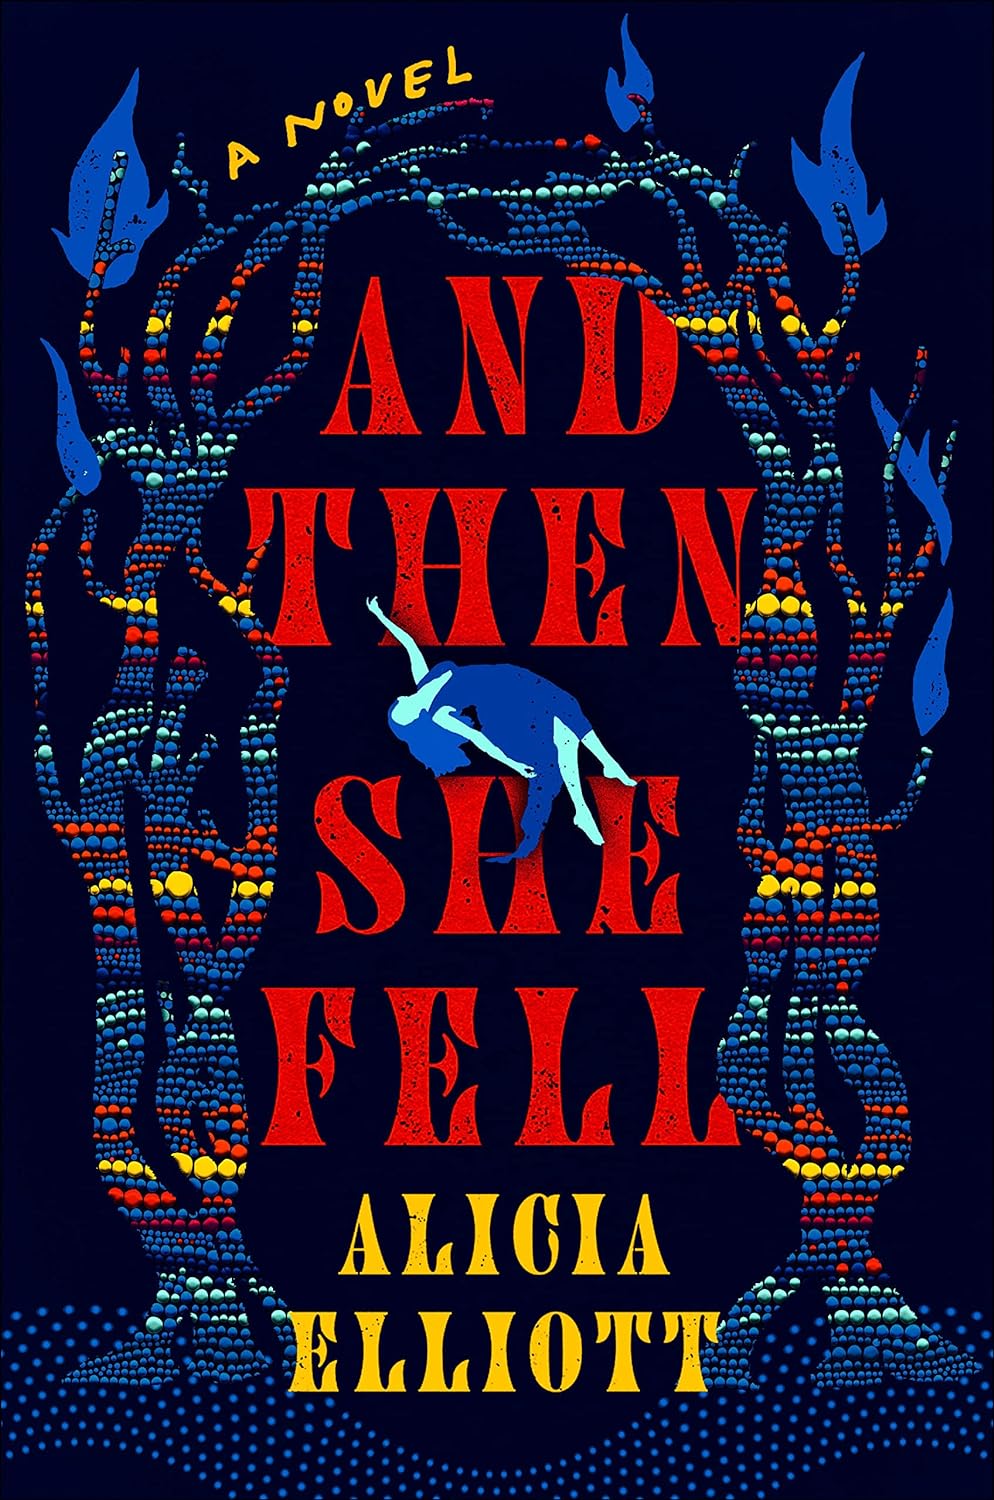 And Then She Fell by Alicia Elliott